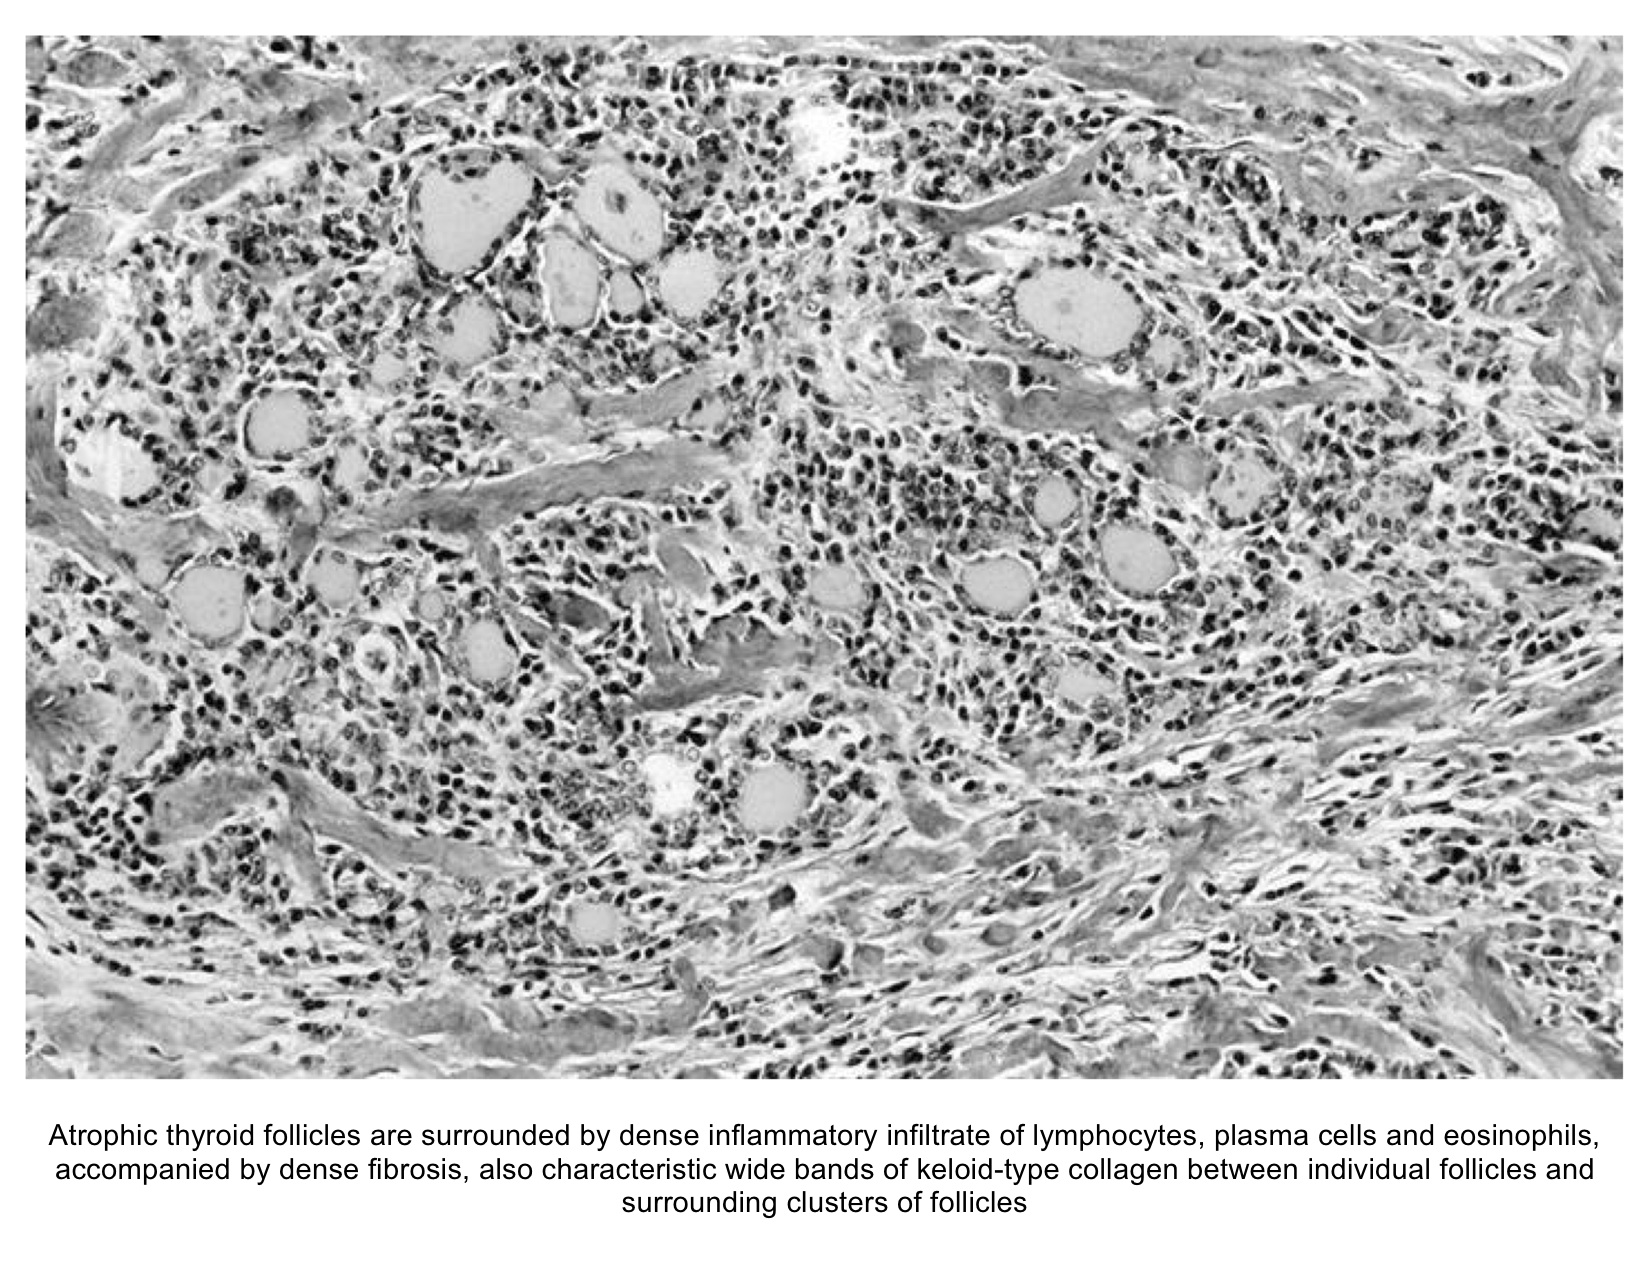 Histology of Riedel's thyroiditis (Image courtesy of AFIP and PathologyOutlines.com; http://www.pathologyoutlines.com/topic/thyroidriedel.html )